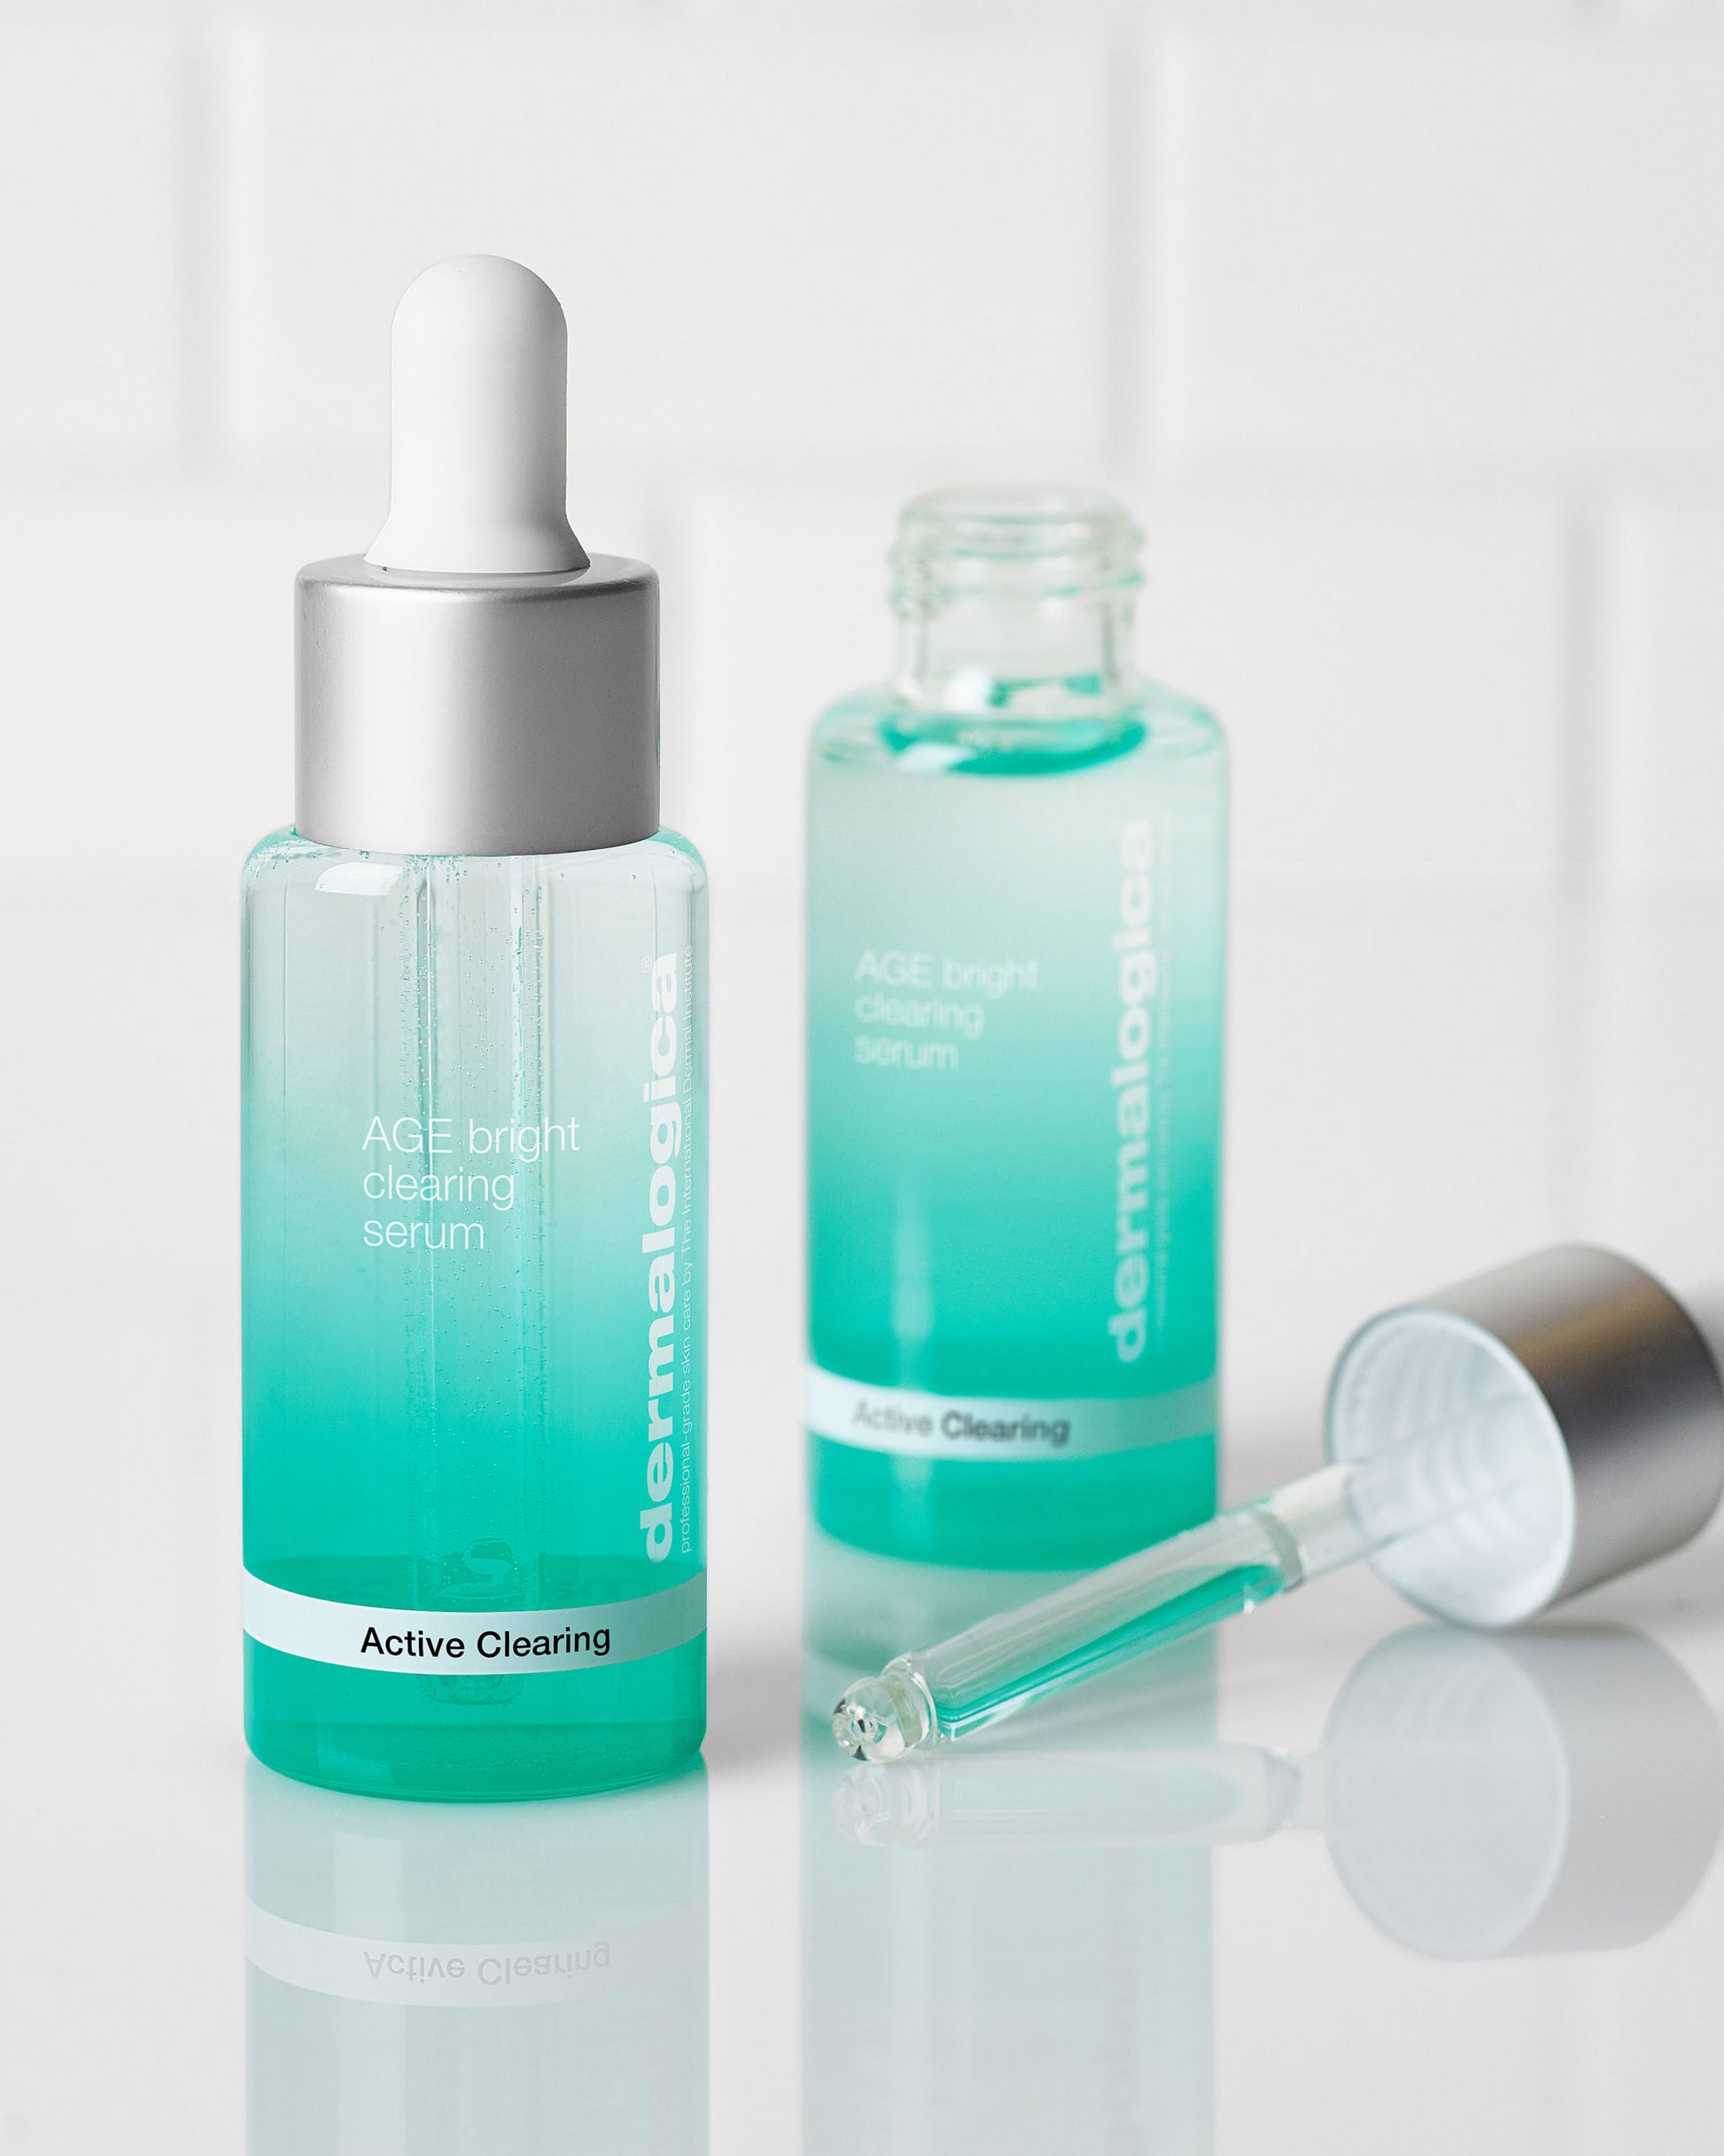 AGE-Bright-Clearing-Serum